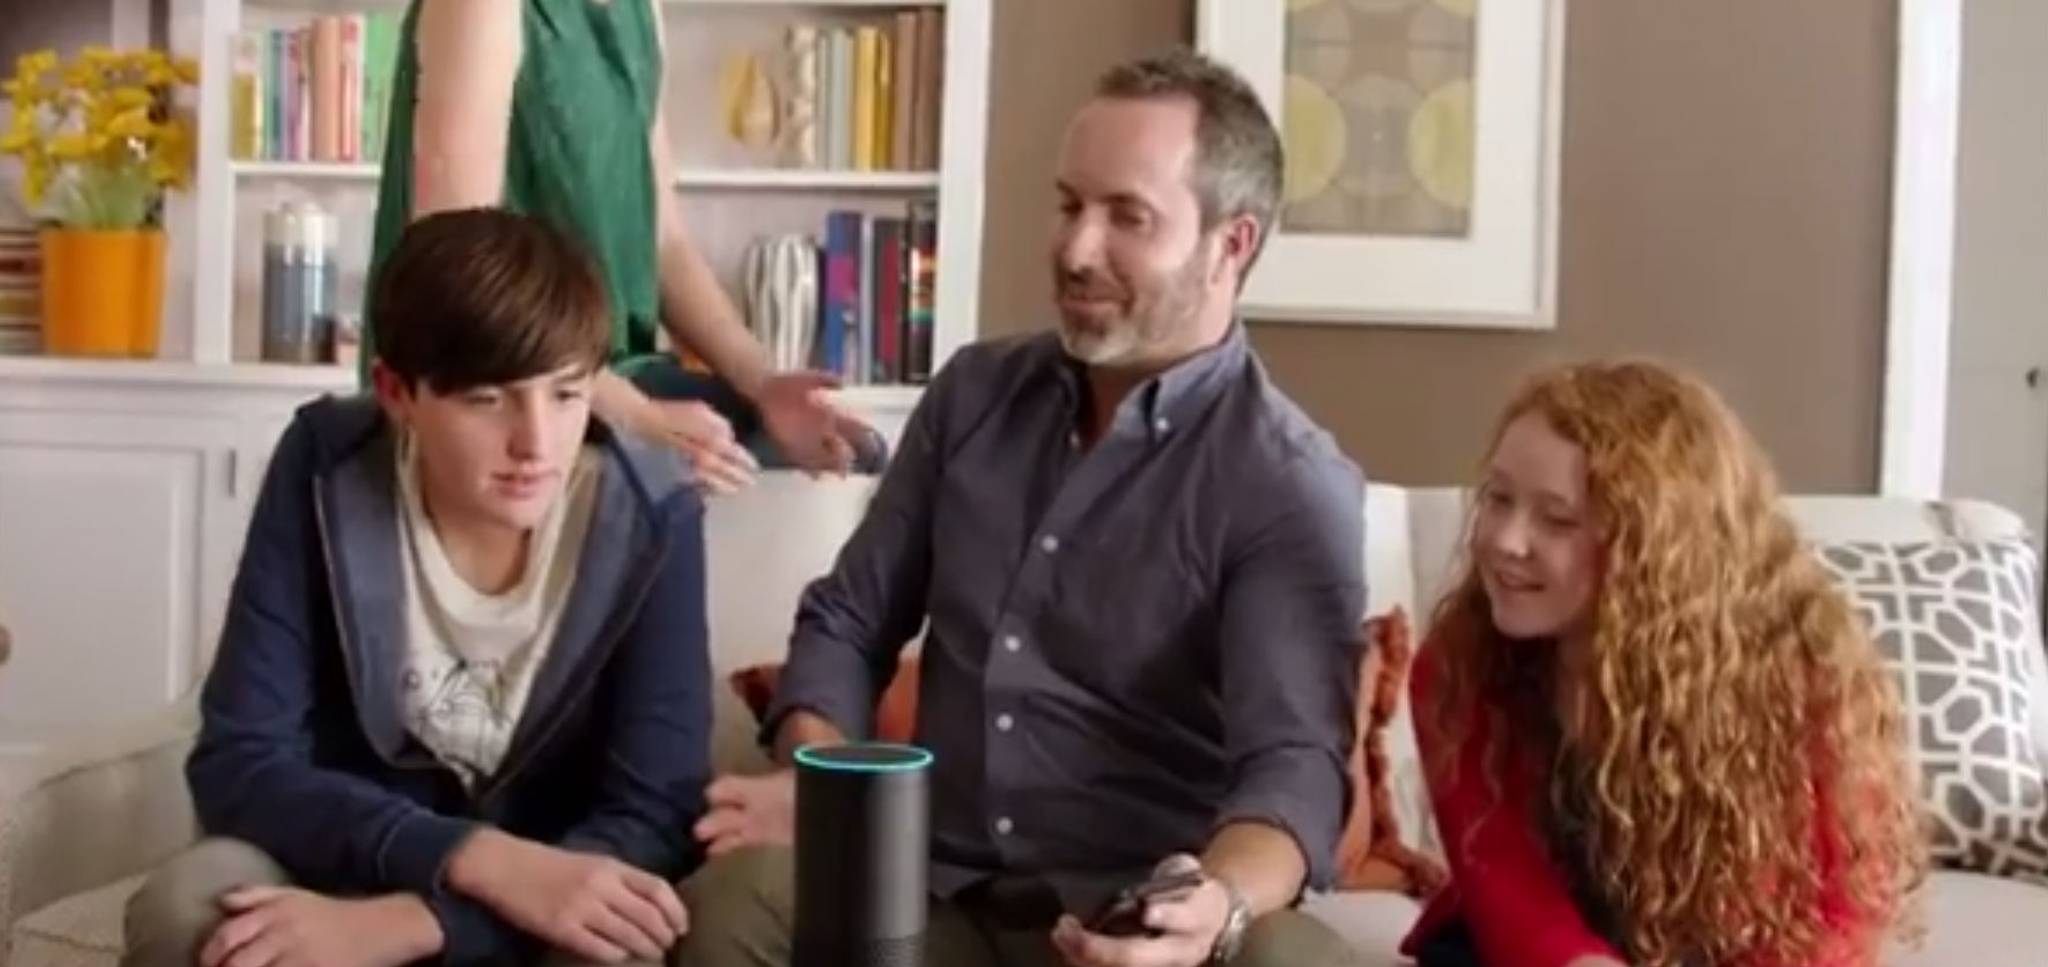 Amazon's digital assistant for the home